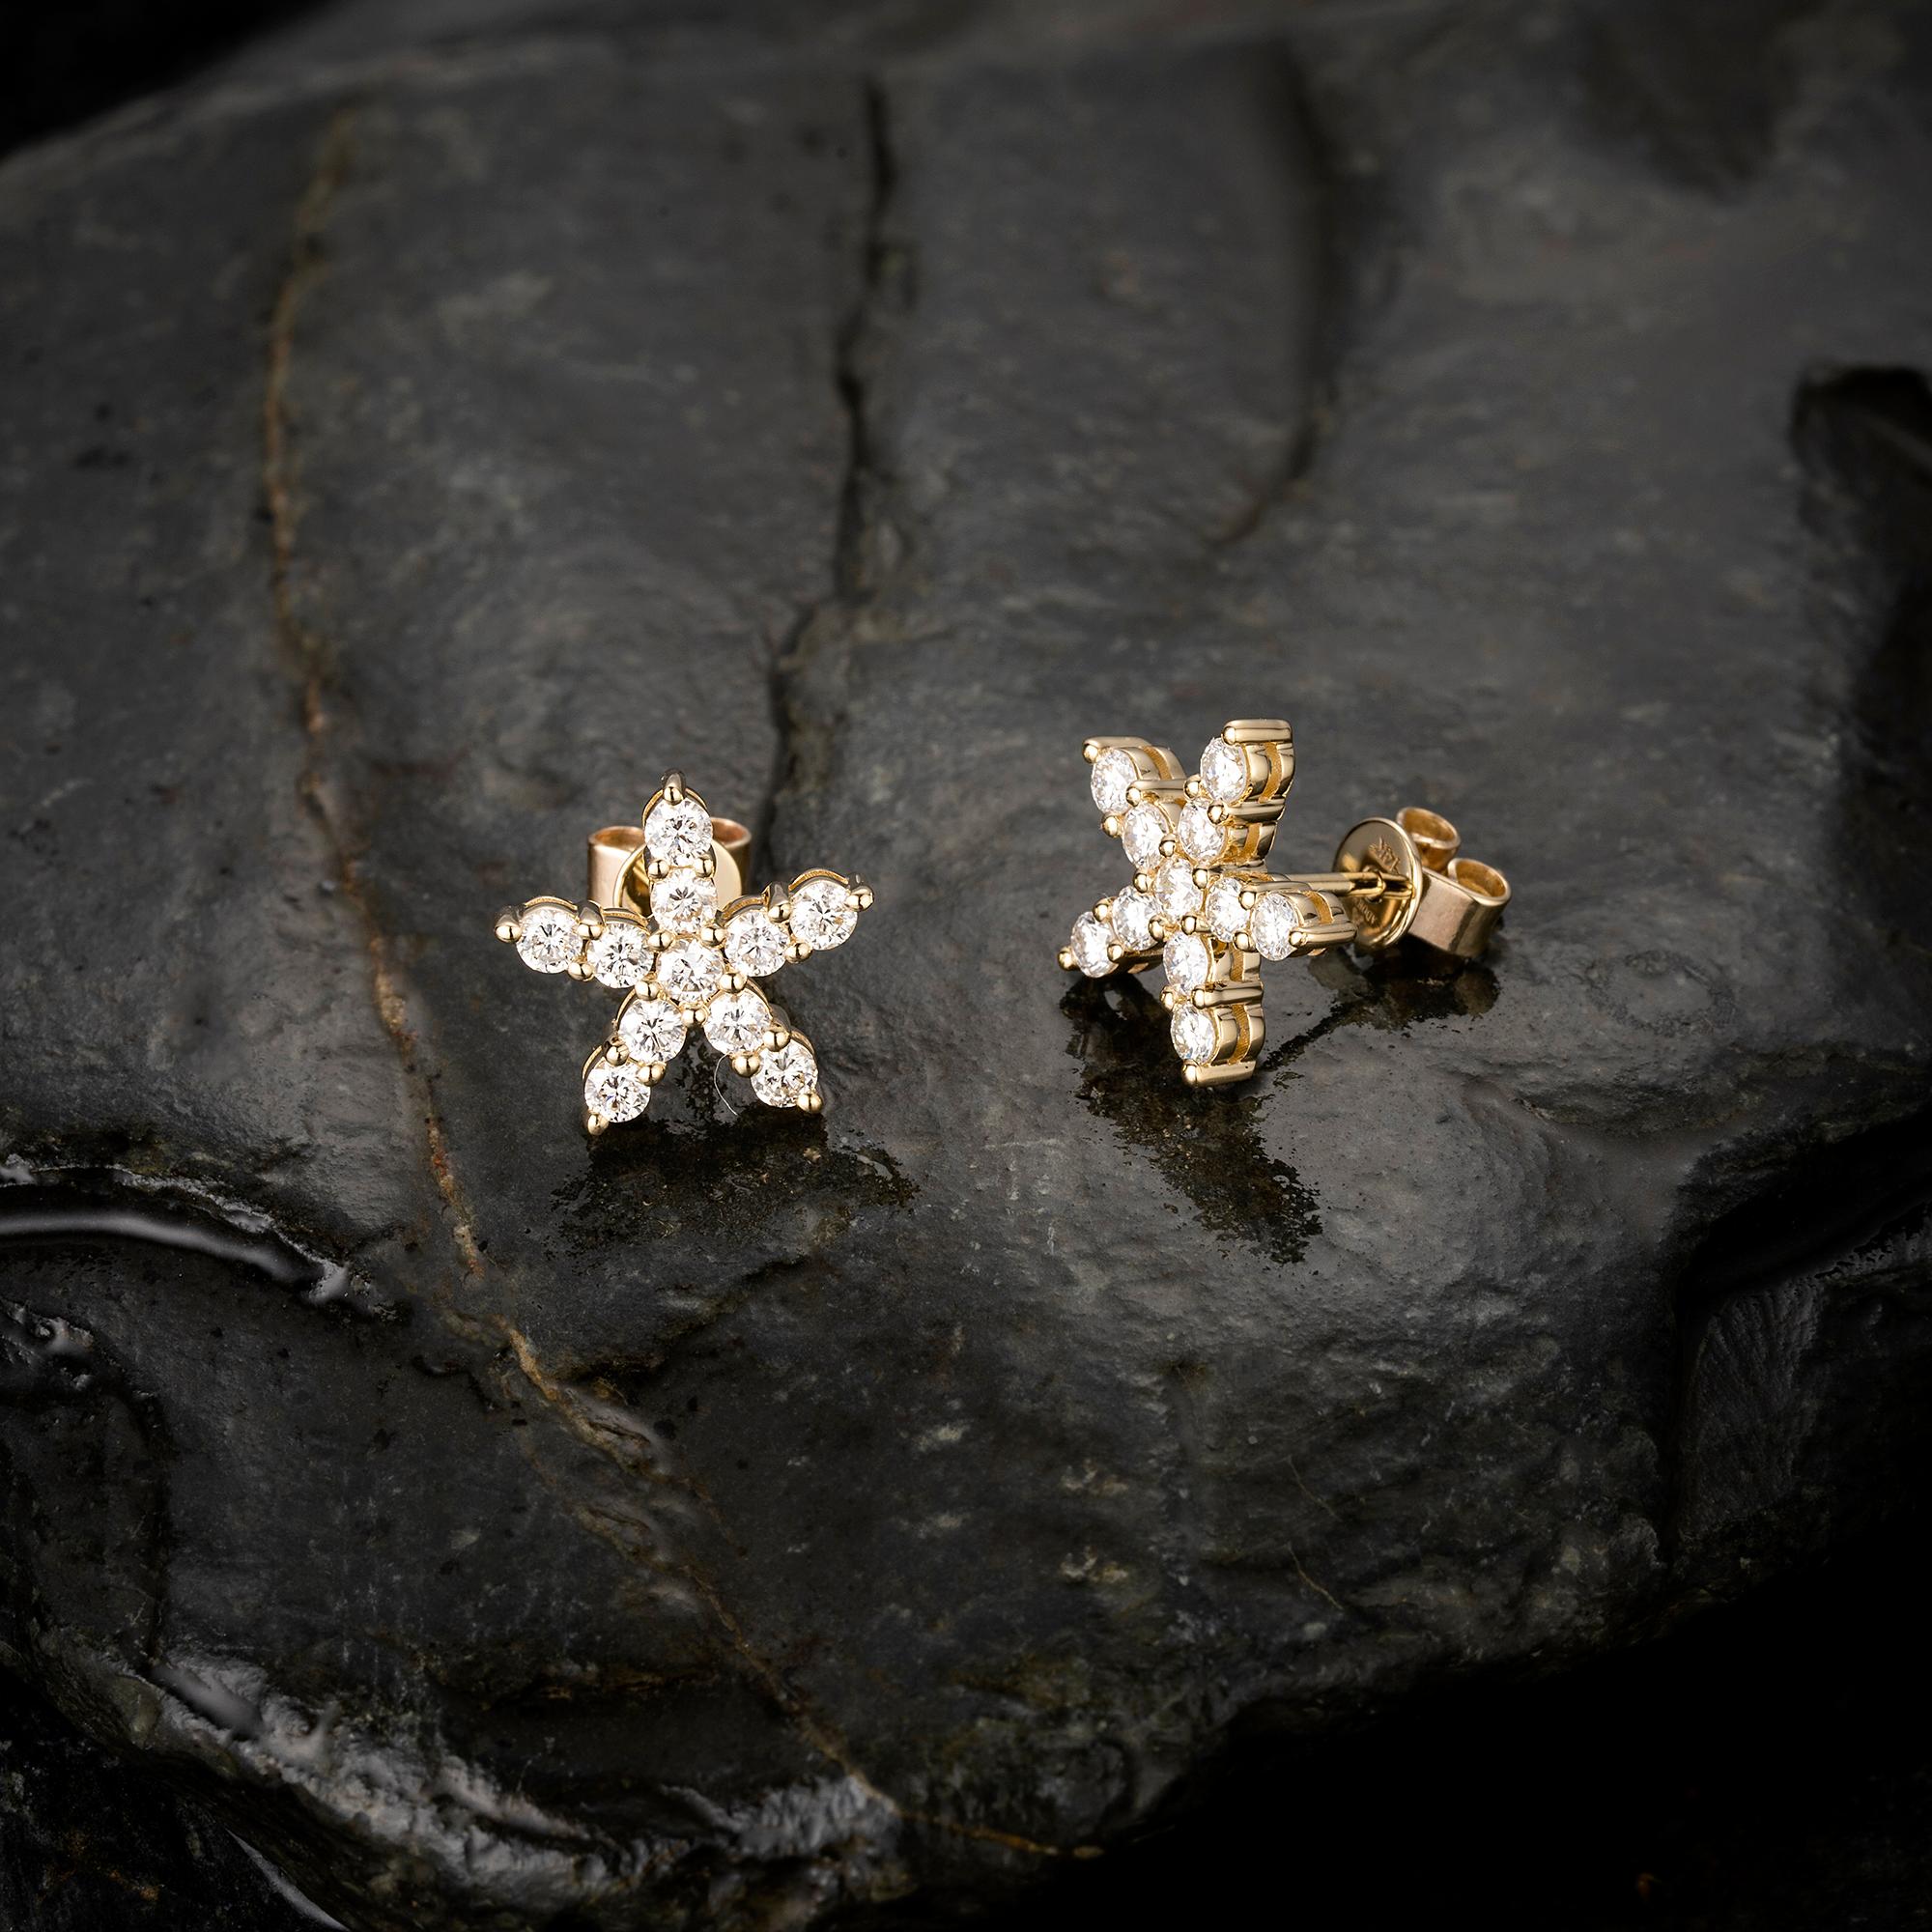 Earring Information
Diamond Type : Natural Diamond
Metal : 14K
Metal Color : Yellow Gold
Diamond Carat Weight : 2.50ttcw
Diamond Color Clarity : G-SI
Weight : 11.5mm
Lead Time : 4-8 Weeks (If out of Stock)

JEWELRY CARE
Over the course of time, body